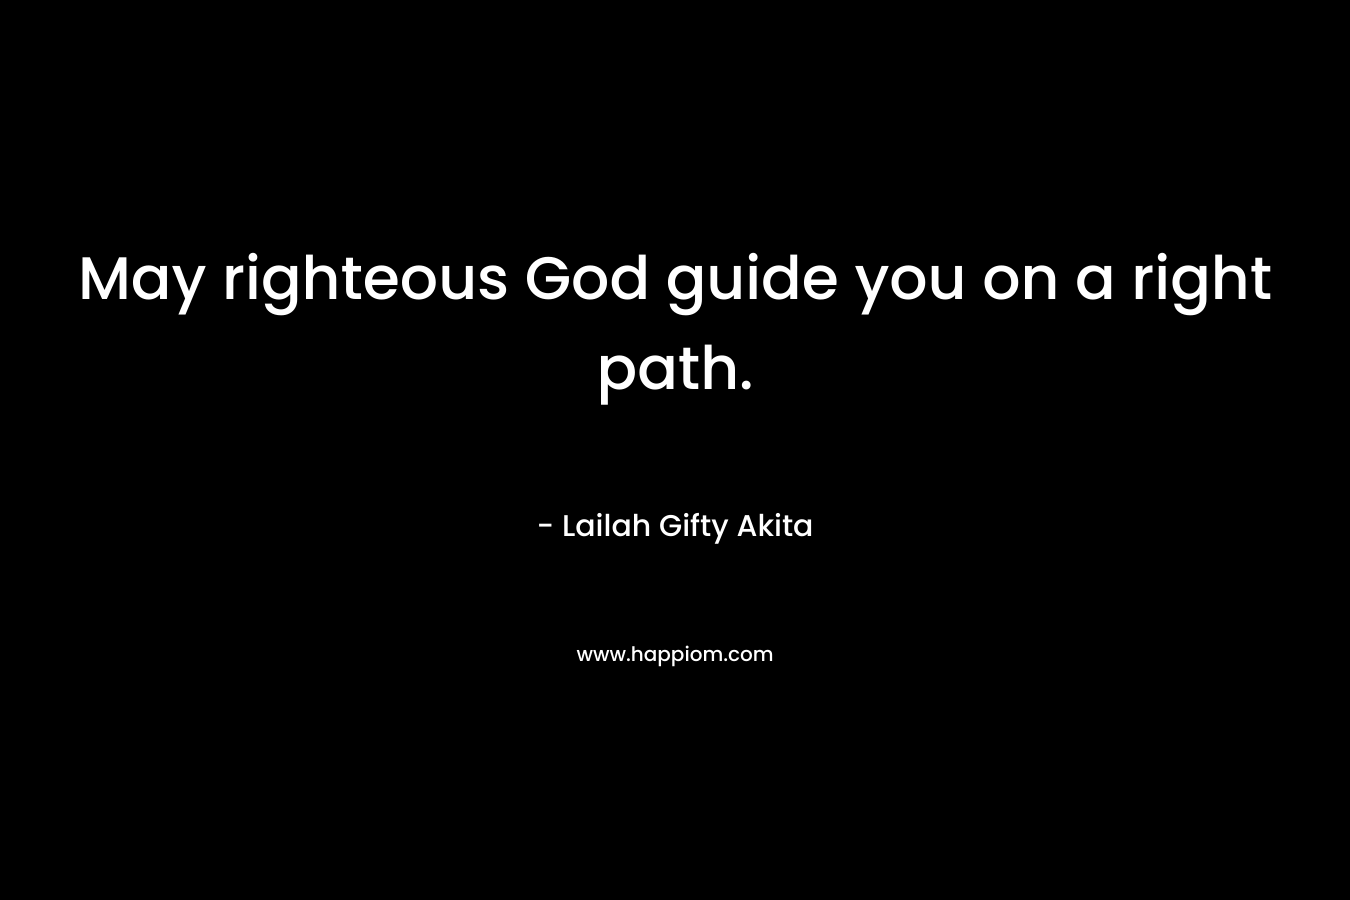 May righteous God guide you on a right path.